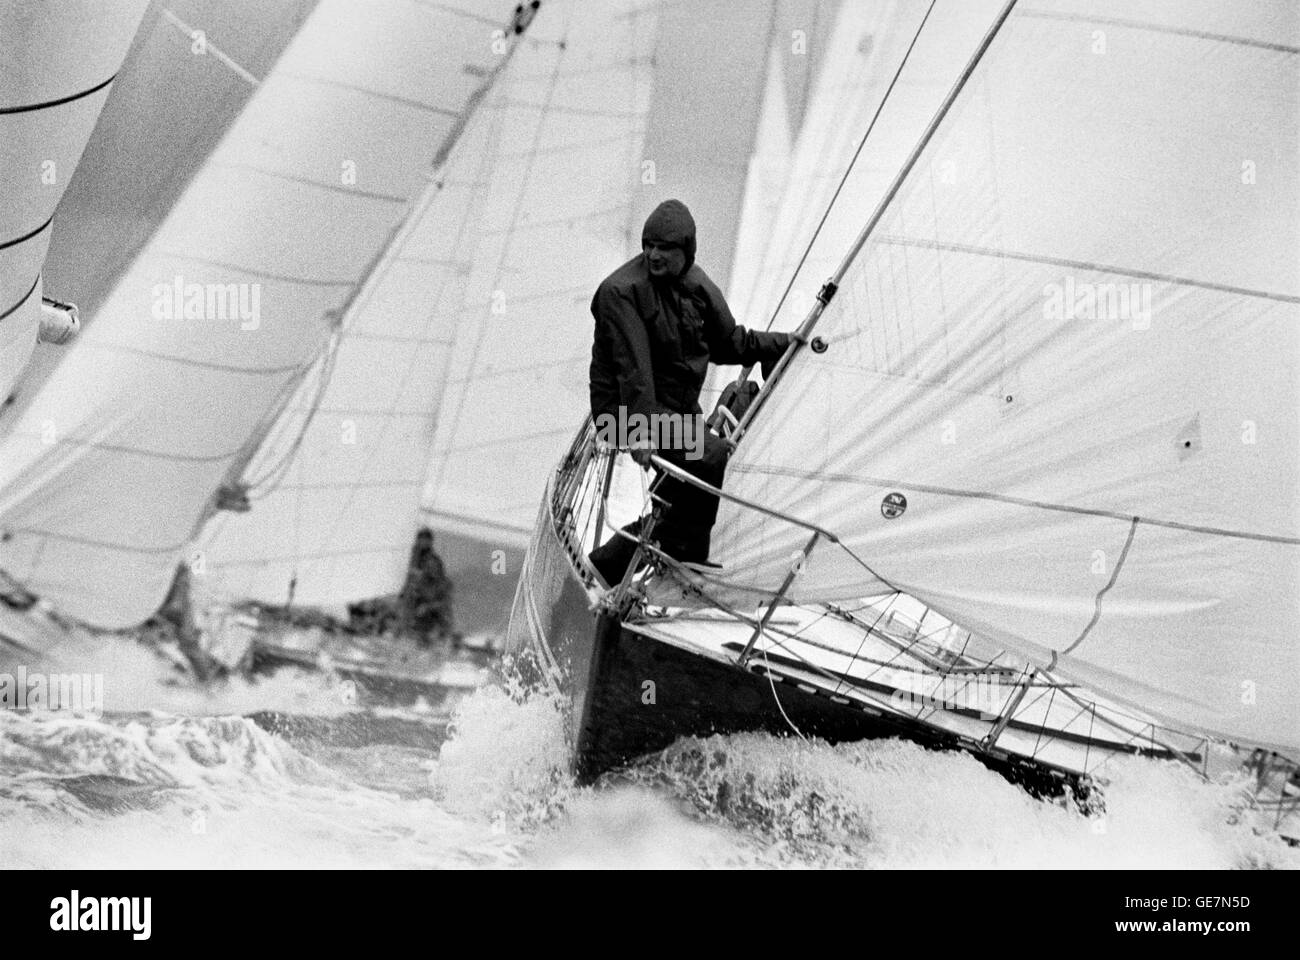 AJAXNETPHOTO. 1979. COWES, ENGLAND. - ADMIRAL'S CUP  - FLEET START OF THE FIRST INSHORE RACE ON THE ROYAL YACHT SQUADRON LINE IN WINDY CONDITIONS. PHOTO : JONATHAN EASTLAND / AJAX REF:()YAR ADC LOOKOUT 979 Stock Photo